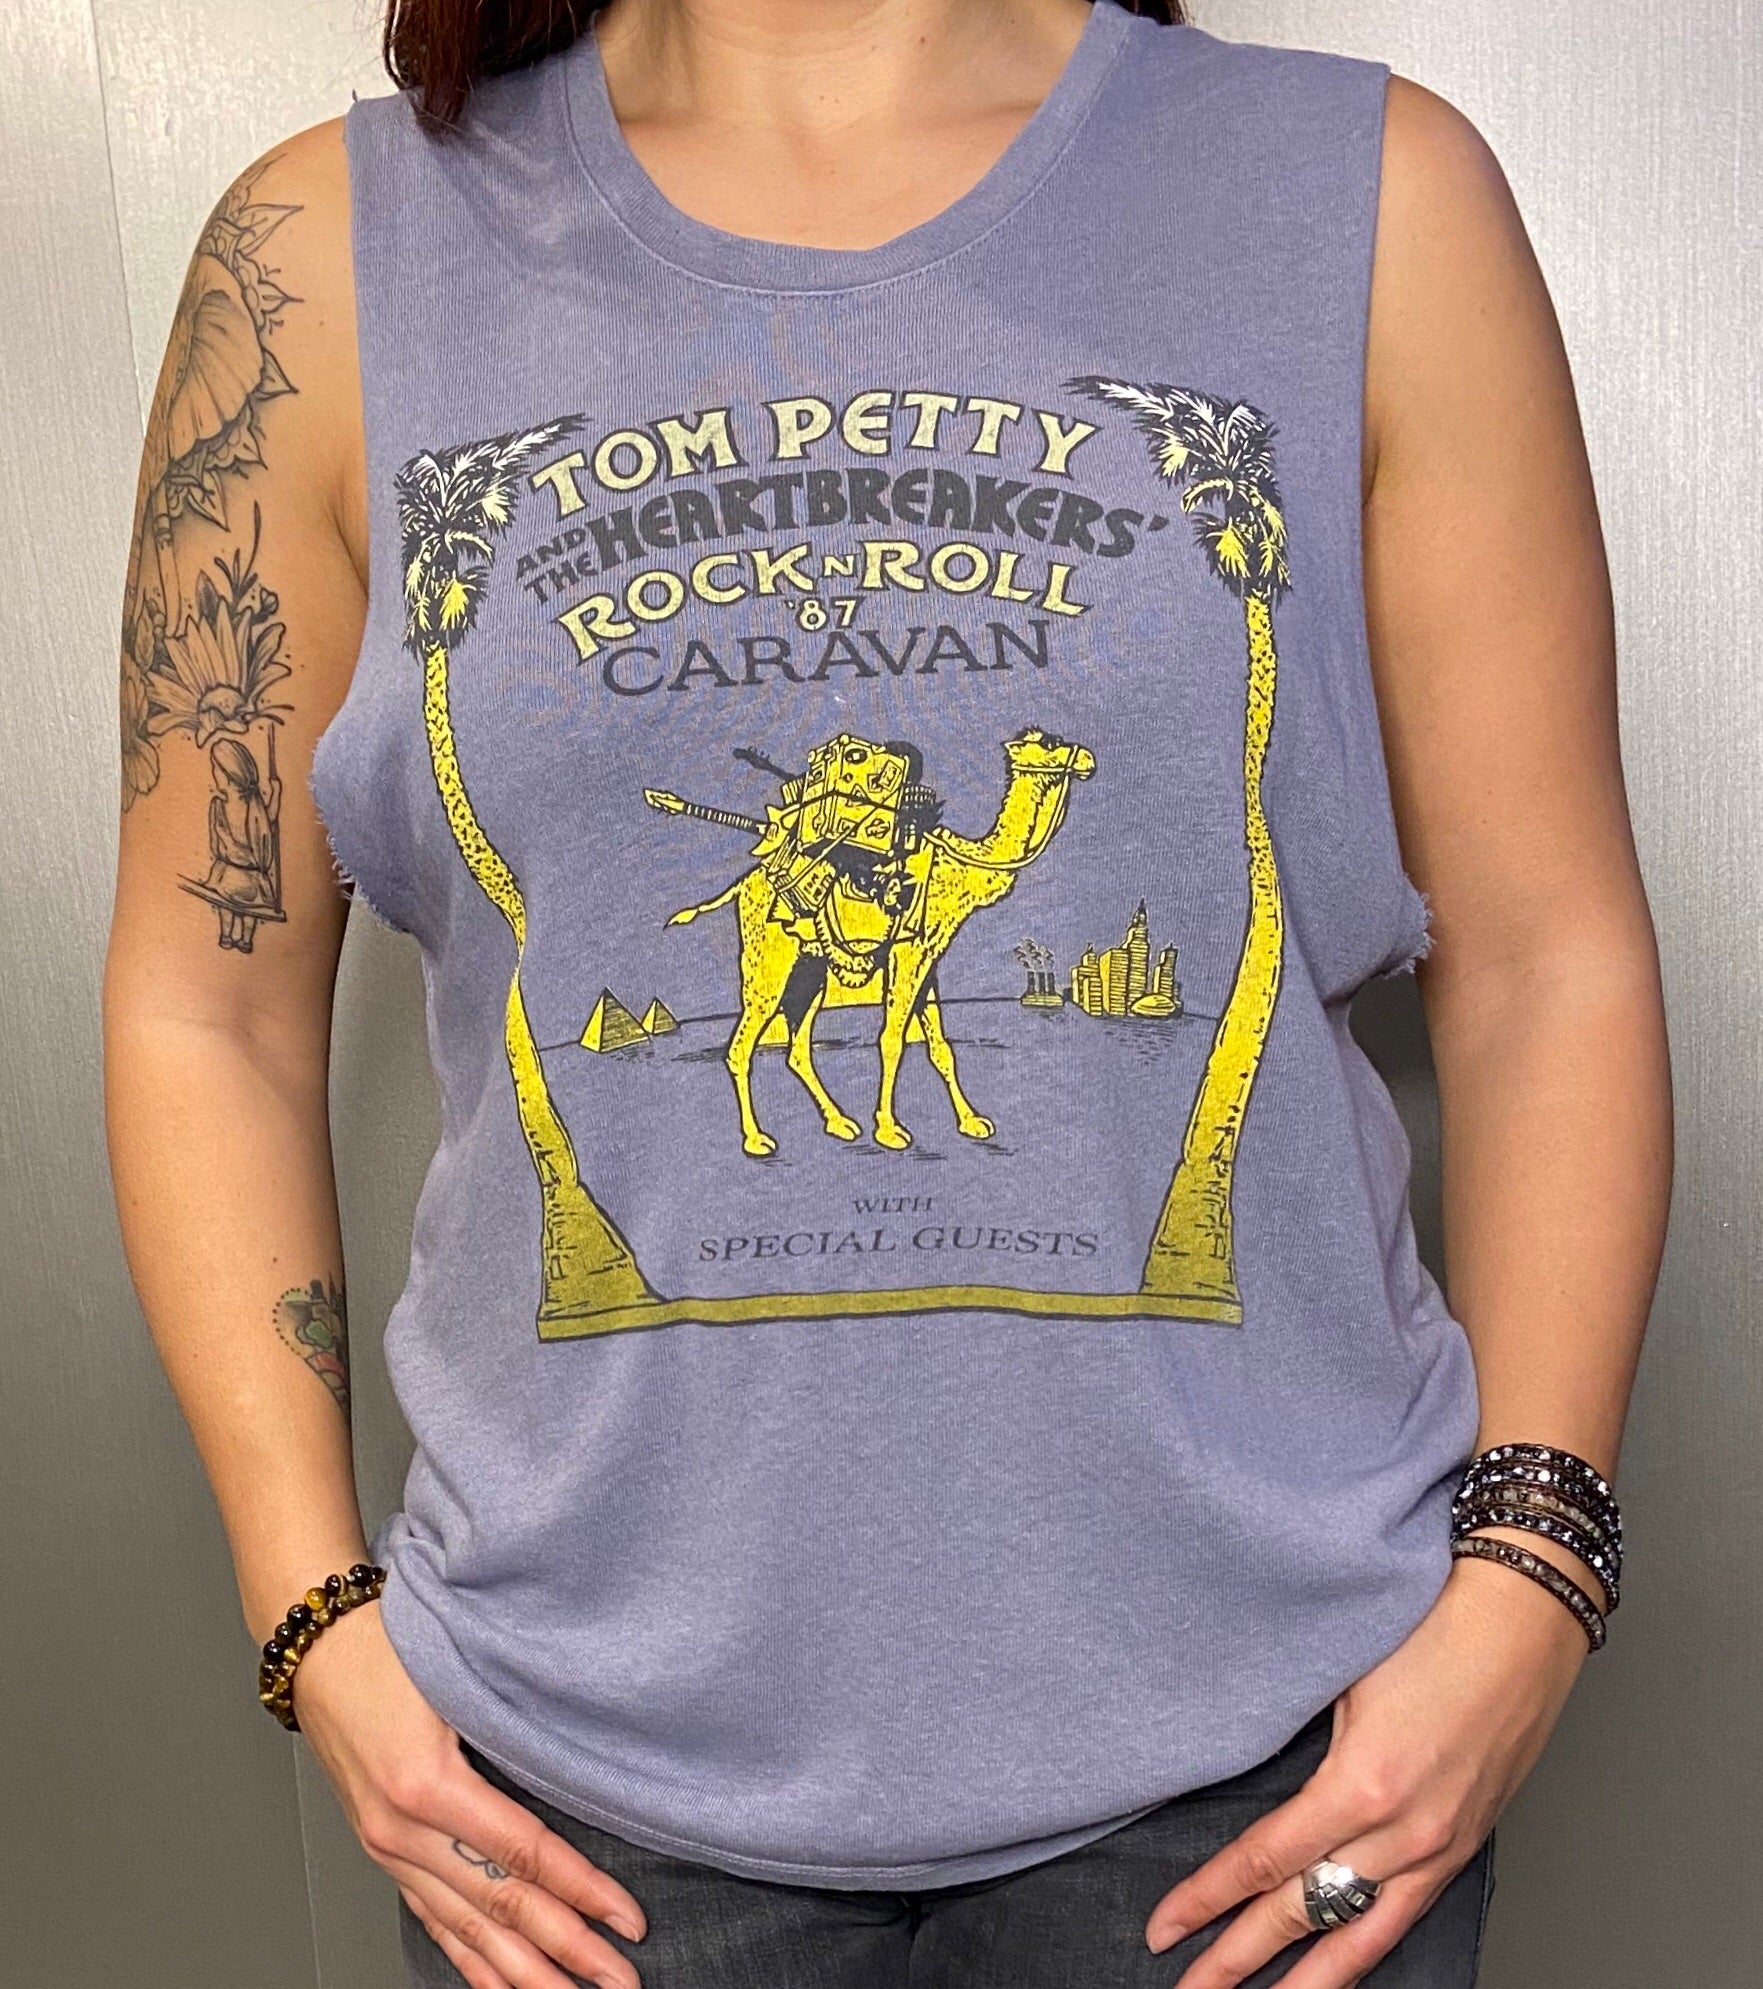 Tom Petty graphic muscle tee